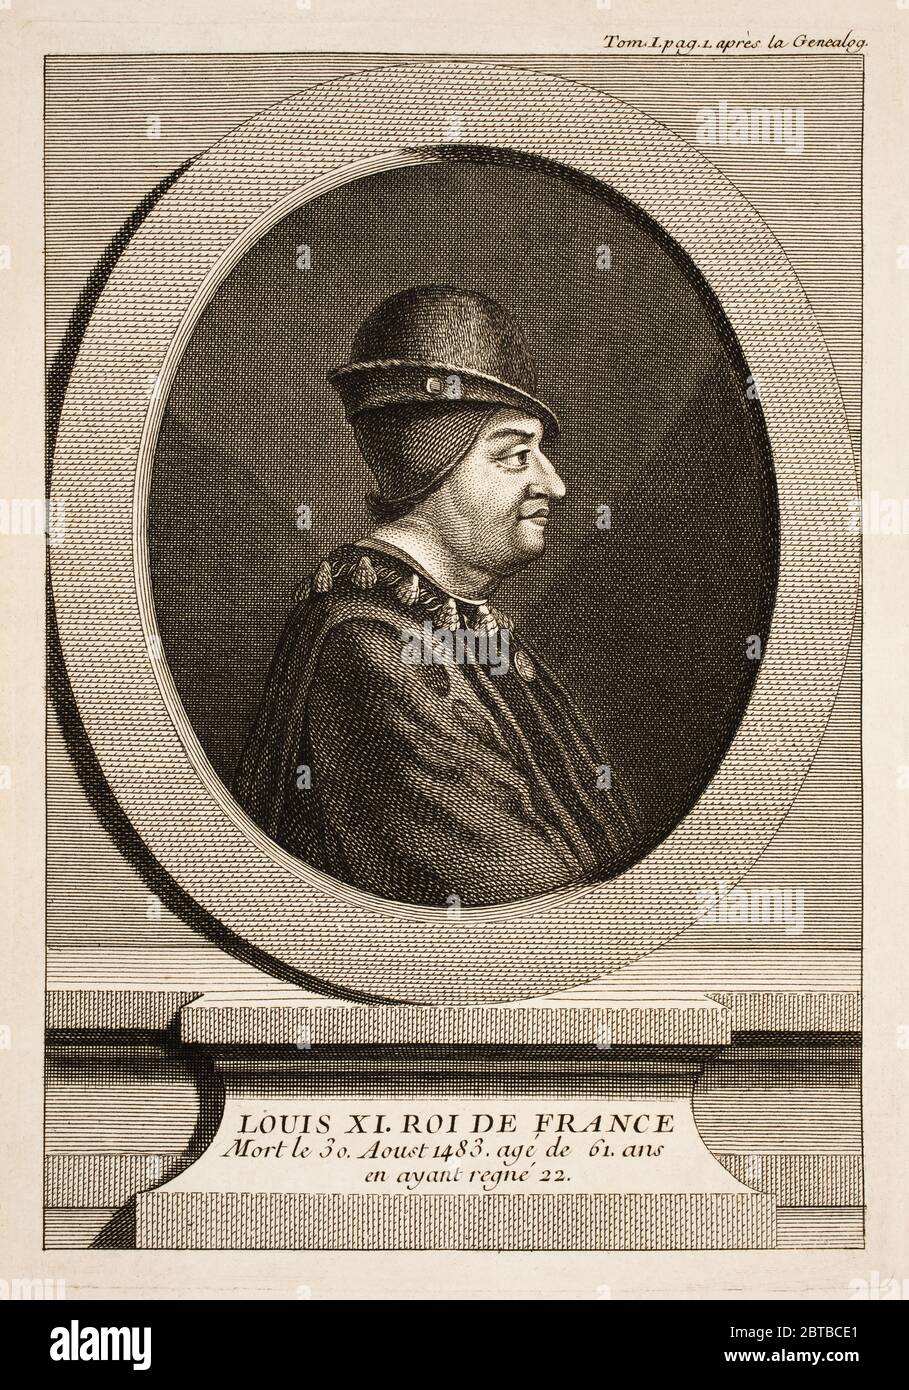 1480 ca, FRANCE: The French King LOUIS XI Valois ( 1423 - 1483 ) dit Le Prudent . Father of King Charles VIII . Engraving by unknown , pubblished in 1747 . - NOBILITY - NOBILI francesi - Nobiltà francese - FRANCIA - illustrazione - illustration - engraving - incisione - LUIGI XI Re di Francia --- ARCHIVIO GBB Stock Photo